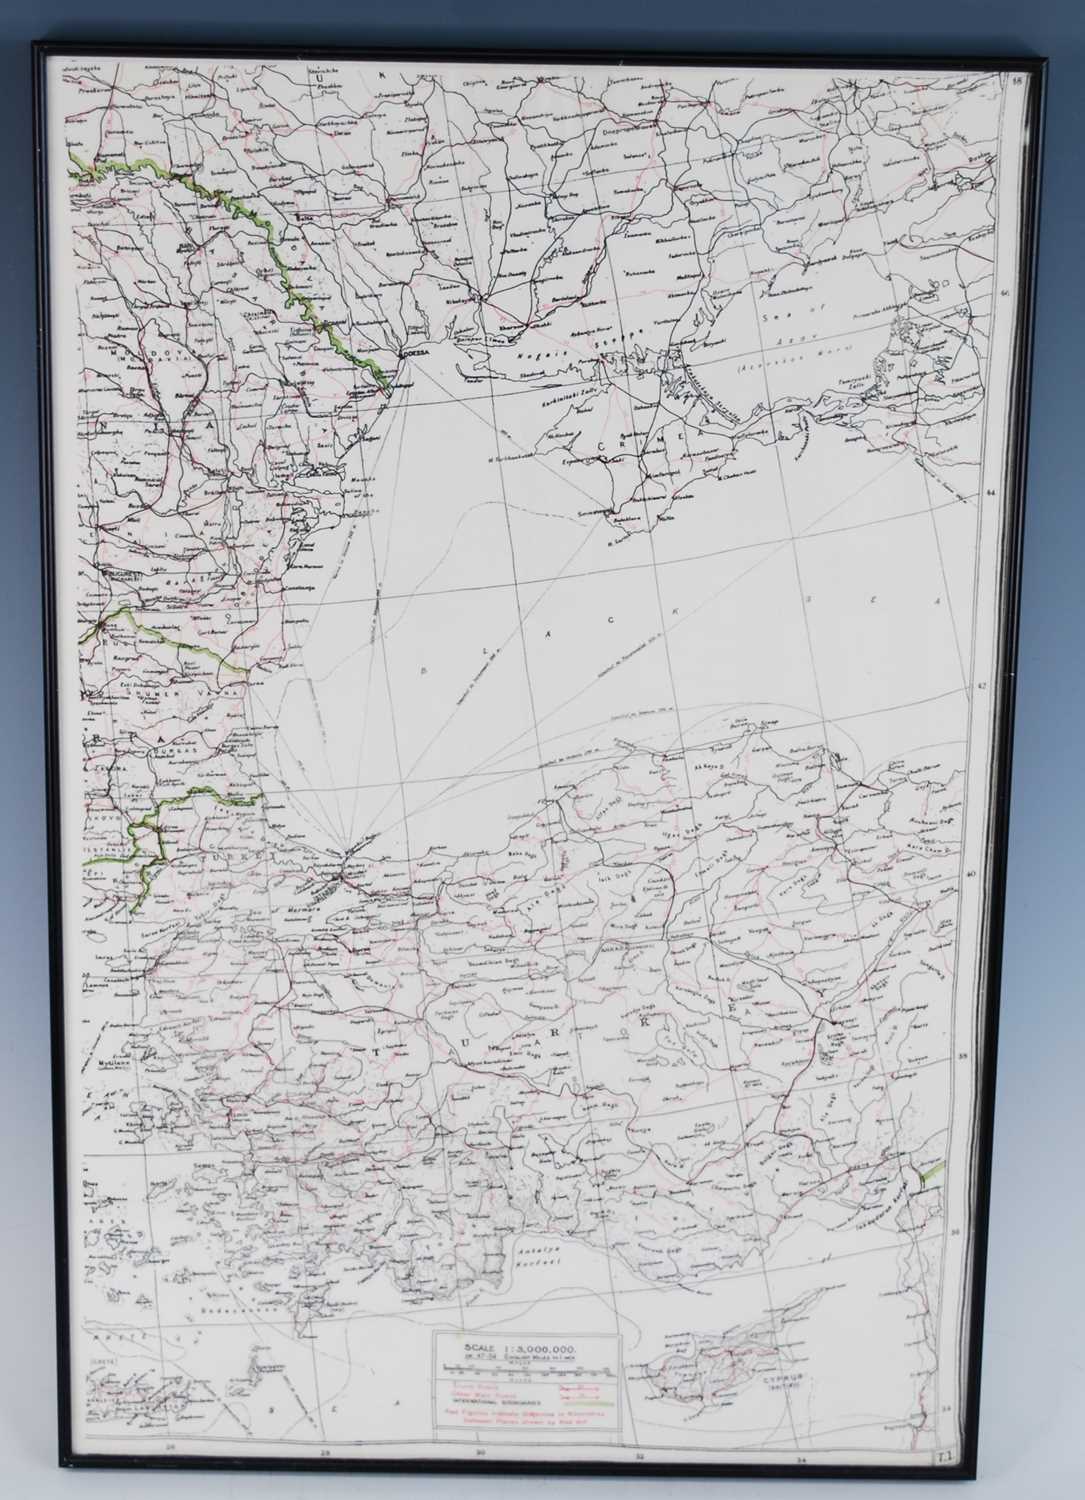 A WW II double sided silk map of North Africa, scale 1:3,000.000 or 47.34 English miles to an - Image 5 of 9